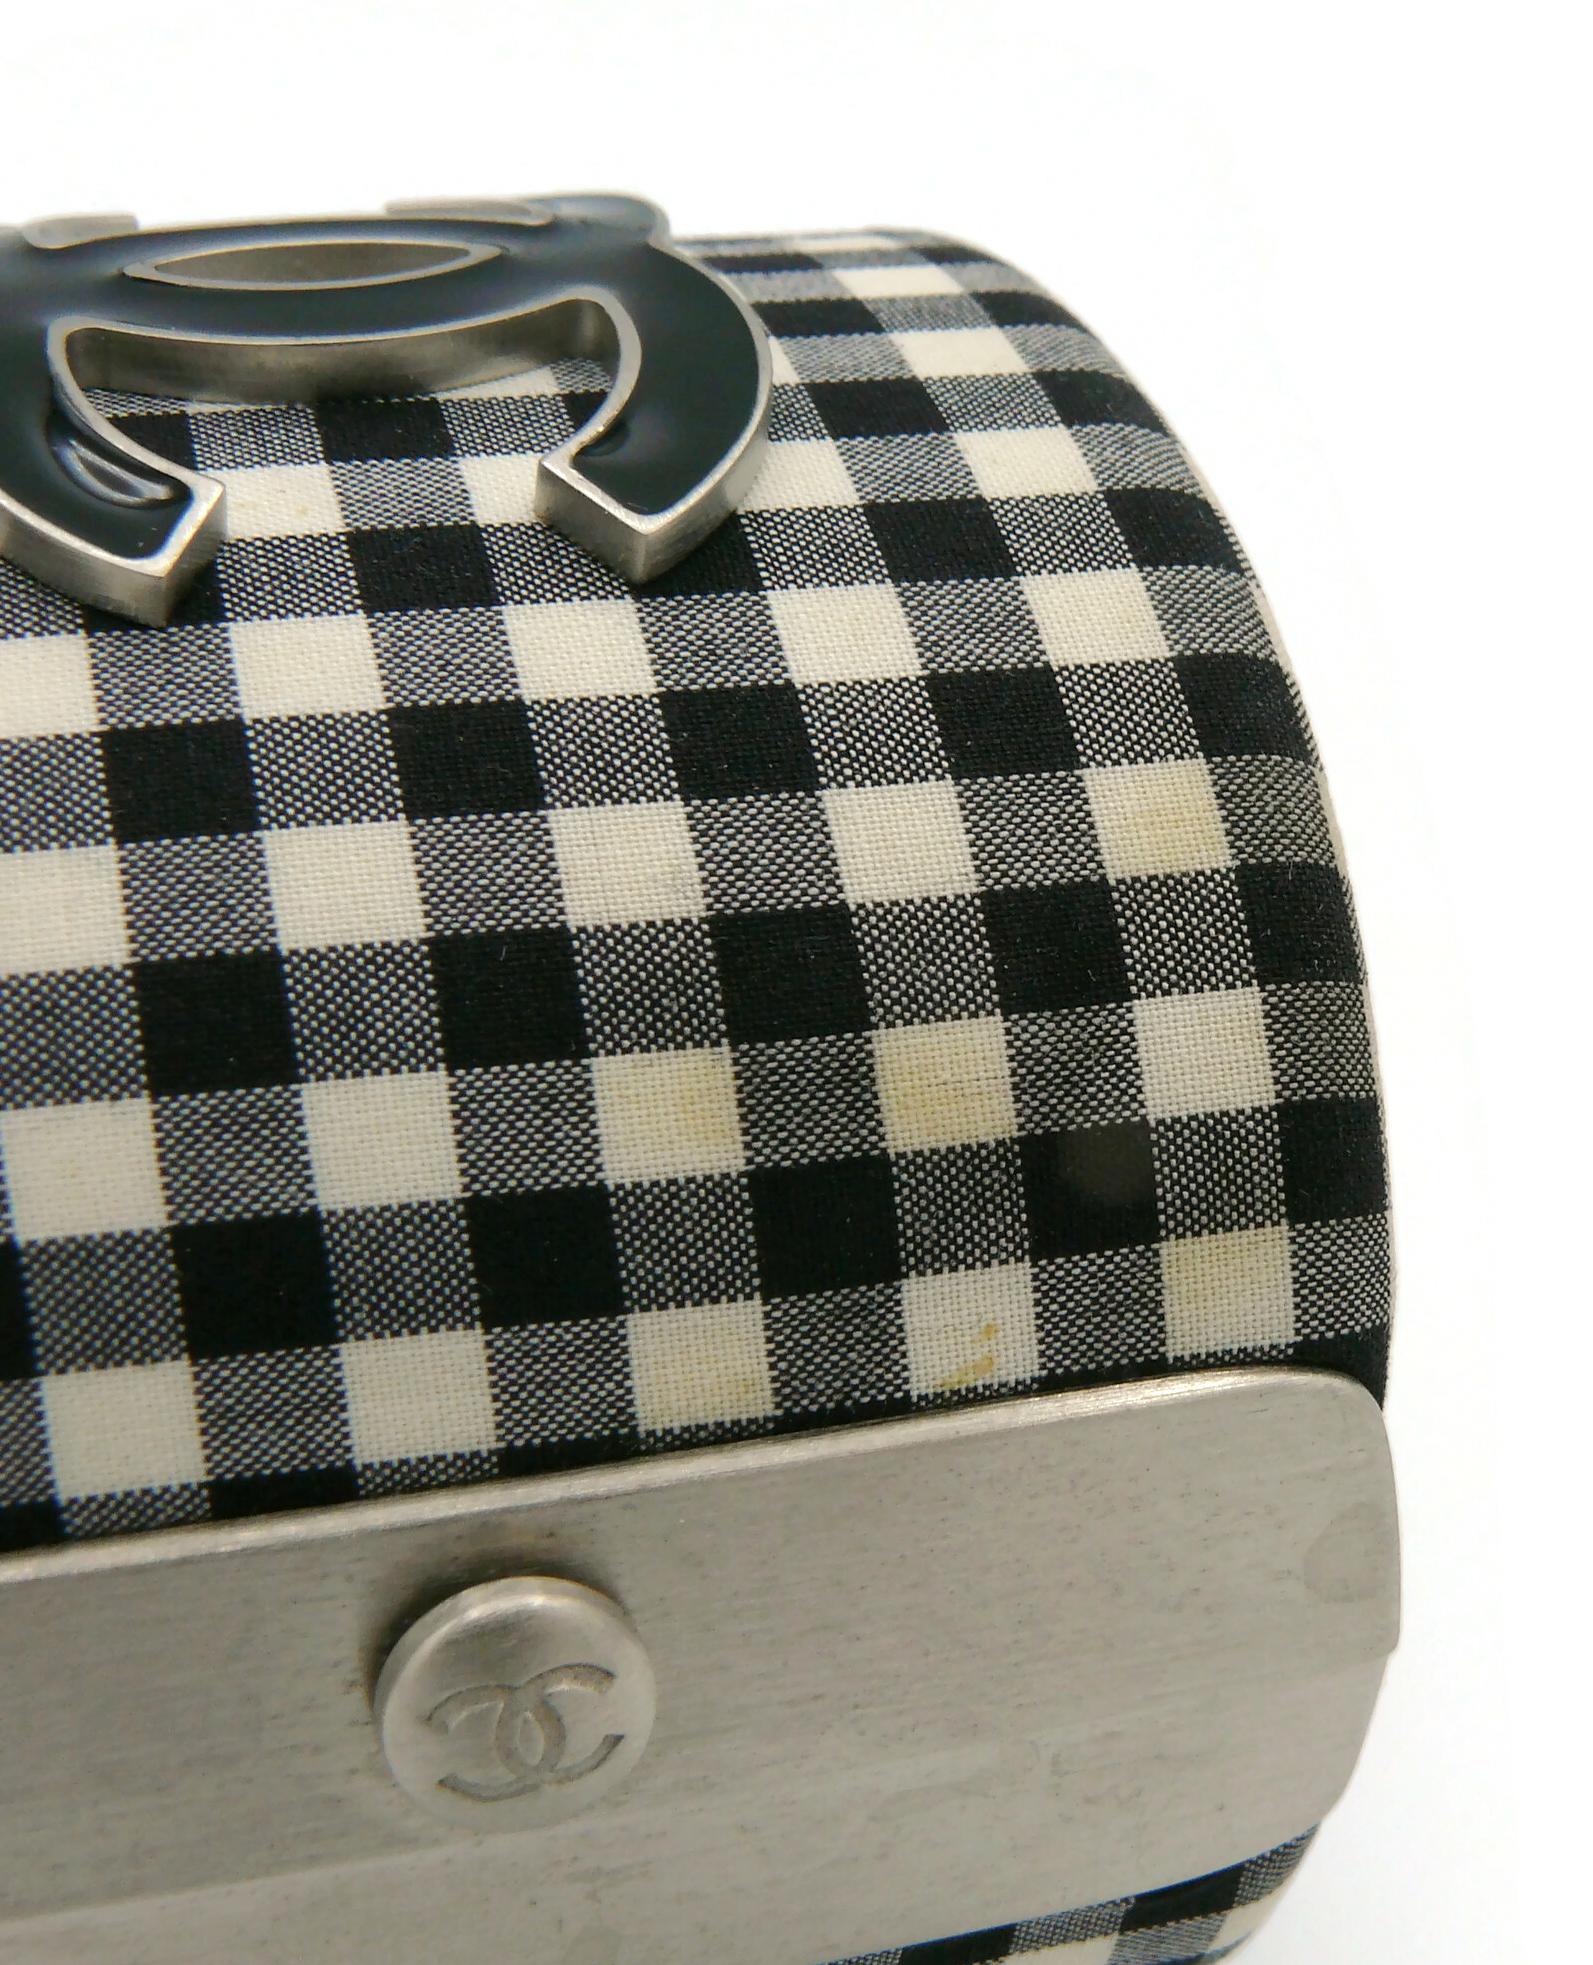 CHANEL Black and White Gingham Vichy Print Cuff Bracelet, Resort Collection 2011 For Sale 8